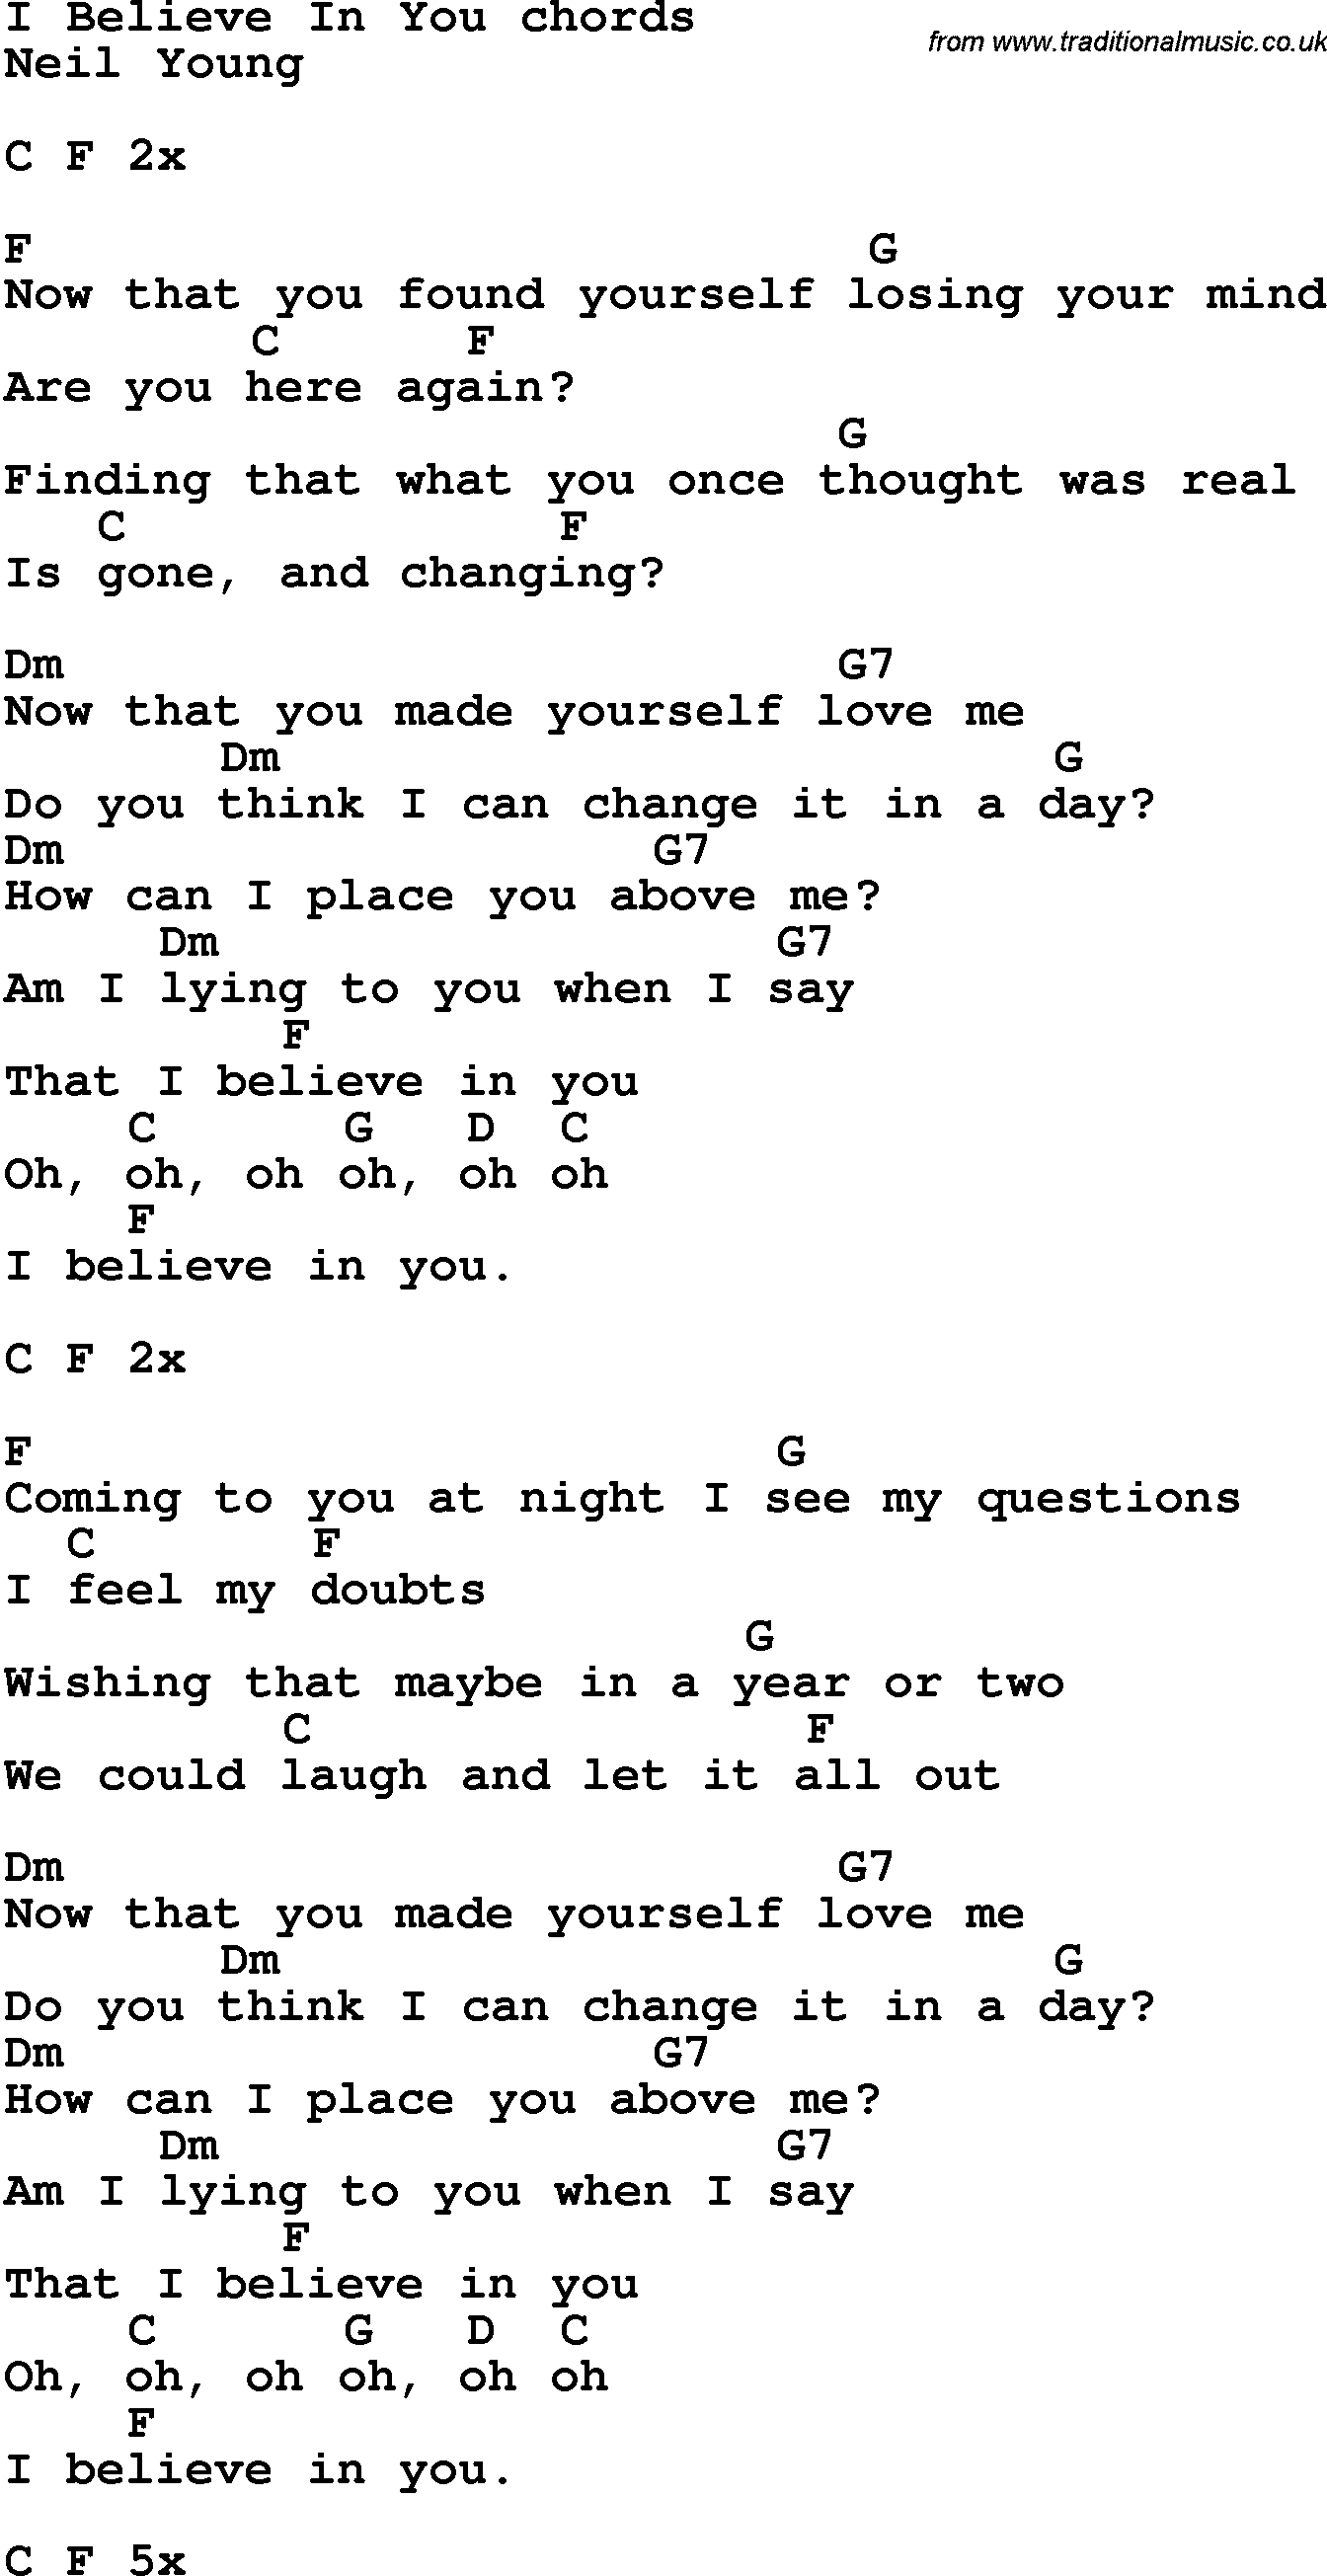 lyrics to neil young song tell me why